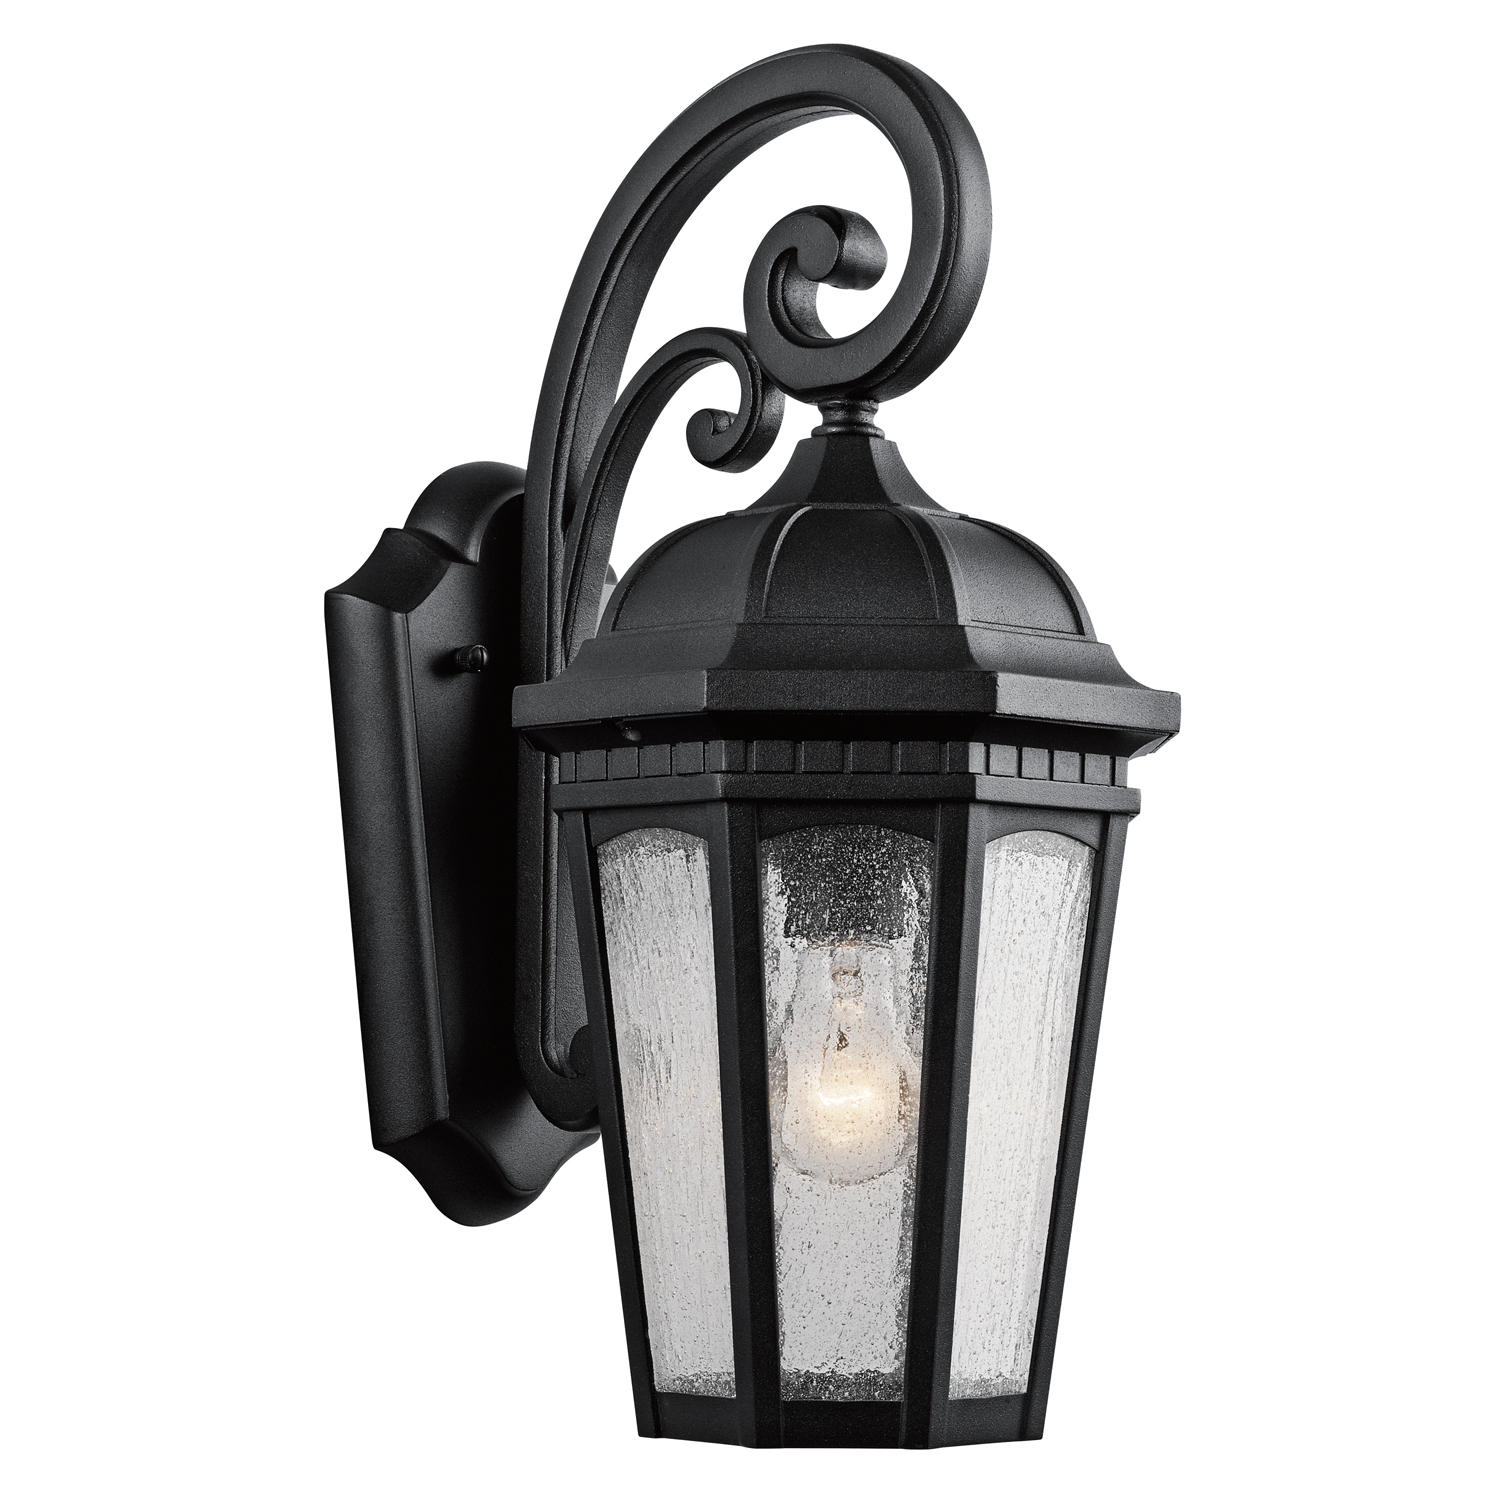 Uncluttered and traditional, this 1 light outdoor wall lantern from the Courtyard(TM) collection adds the warmth of a secluded terrace to any patio or porch. Featuring a Textured Black finish and Clear Seedy Glass, this design will elevate and enhance any space.